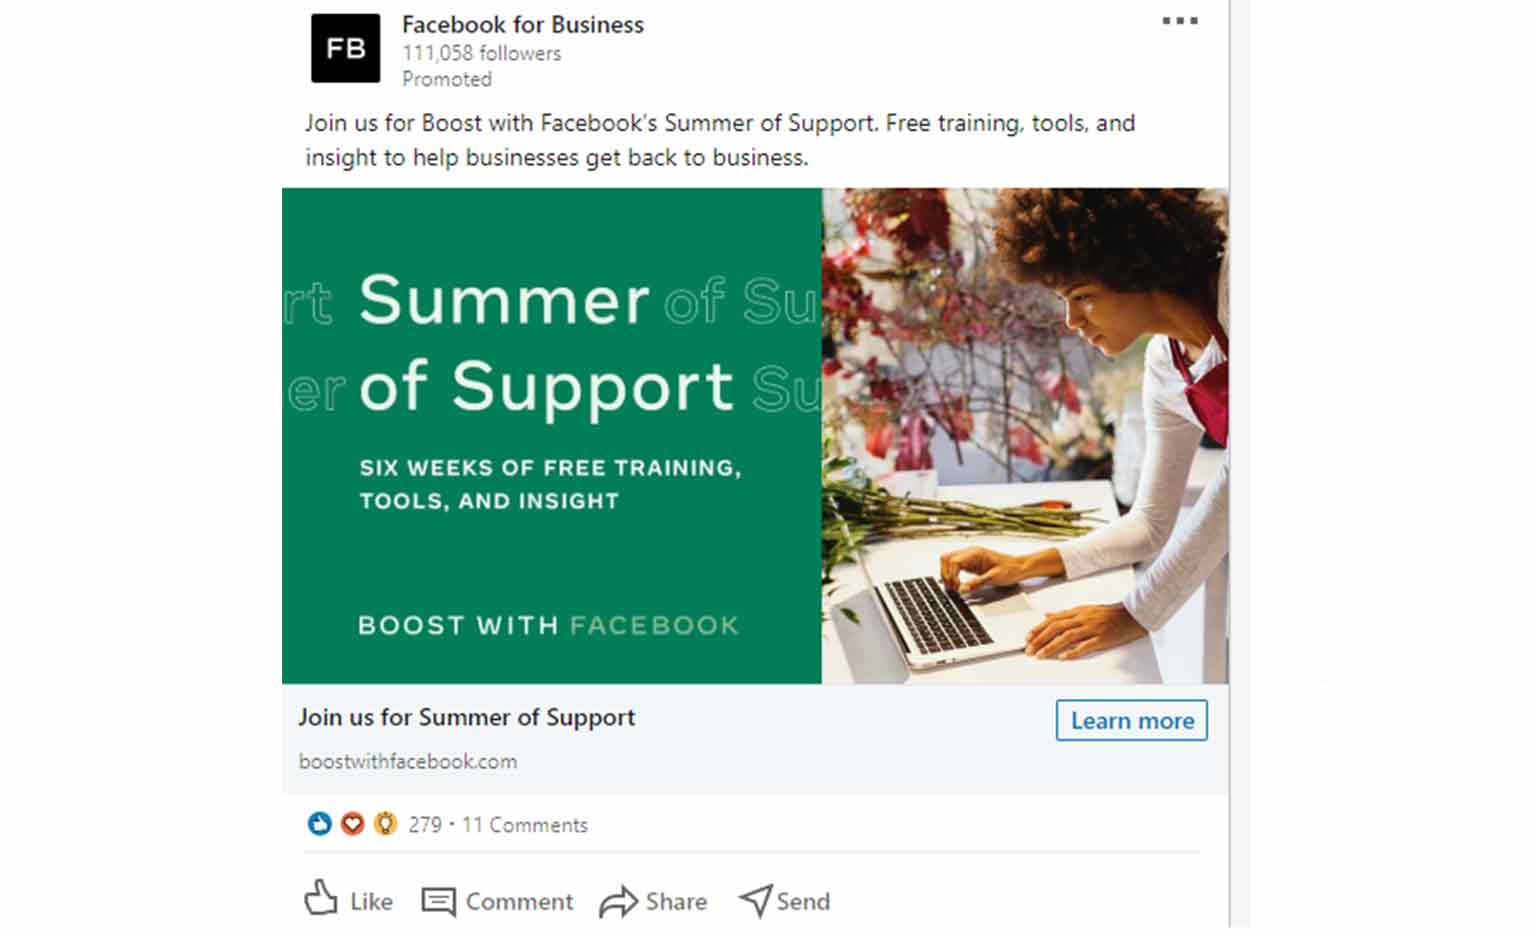 Facebook Business's paid ad on LinkedIn for its Summer of Support training program.